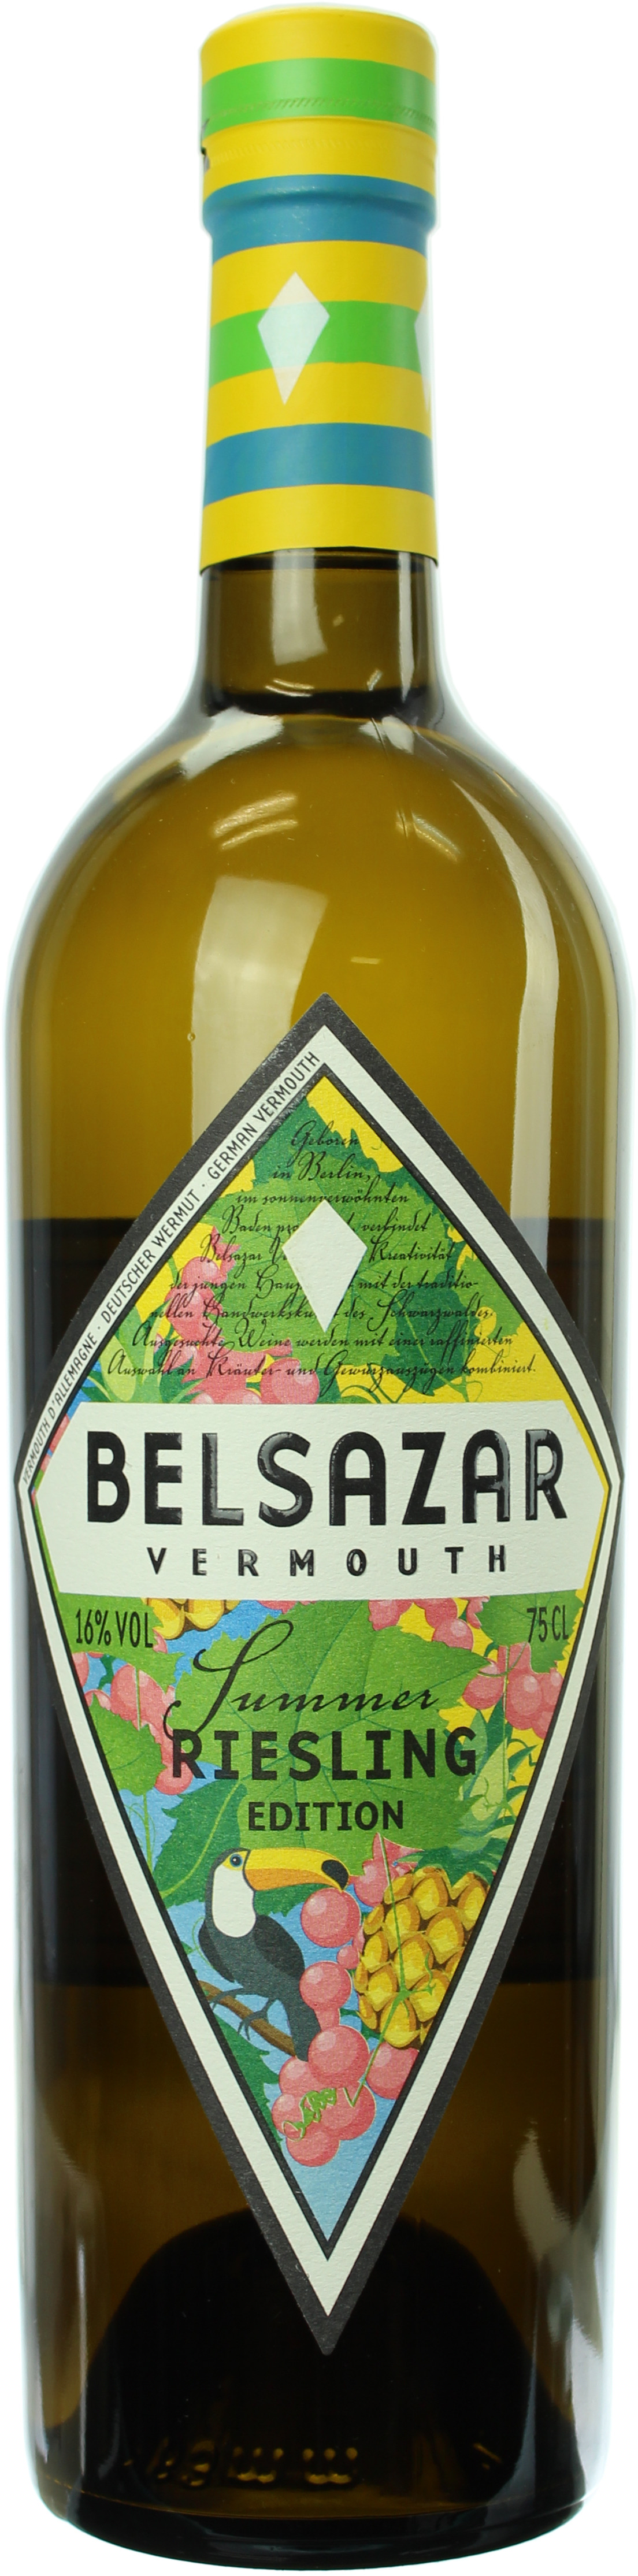 Belsazar Vermouth Riesling Limited Edition 16.0% 0,75l